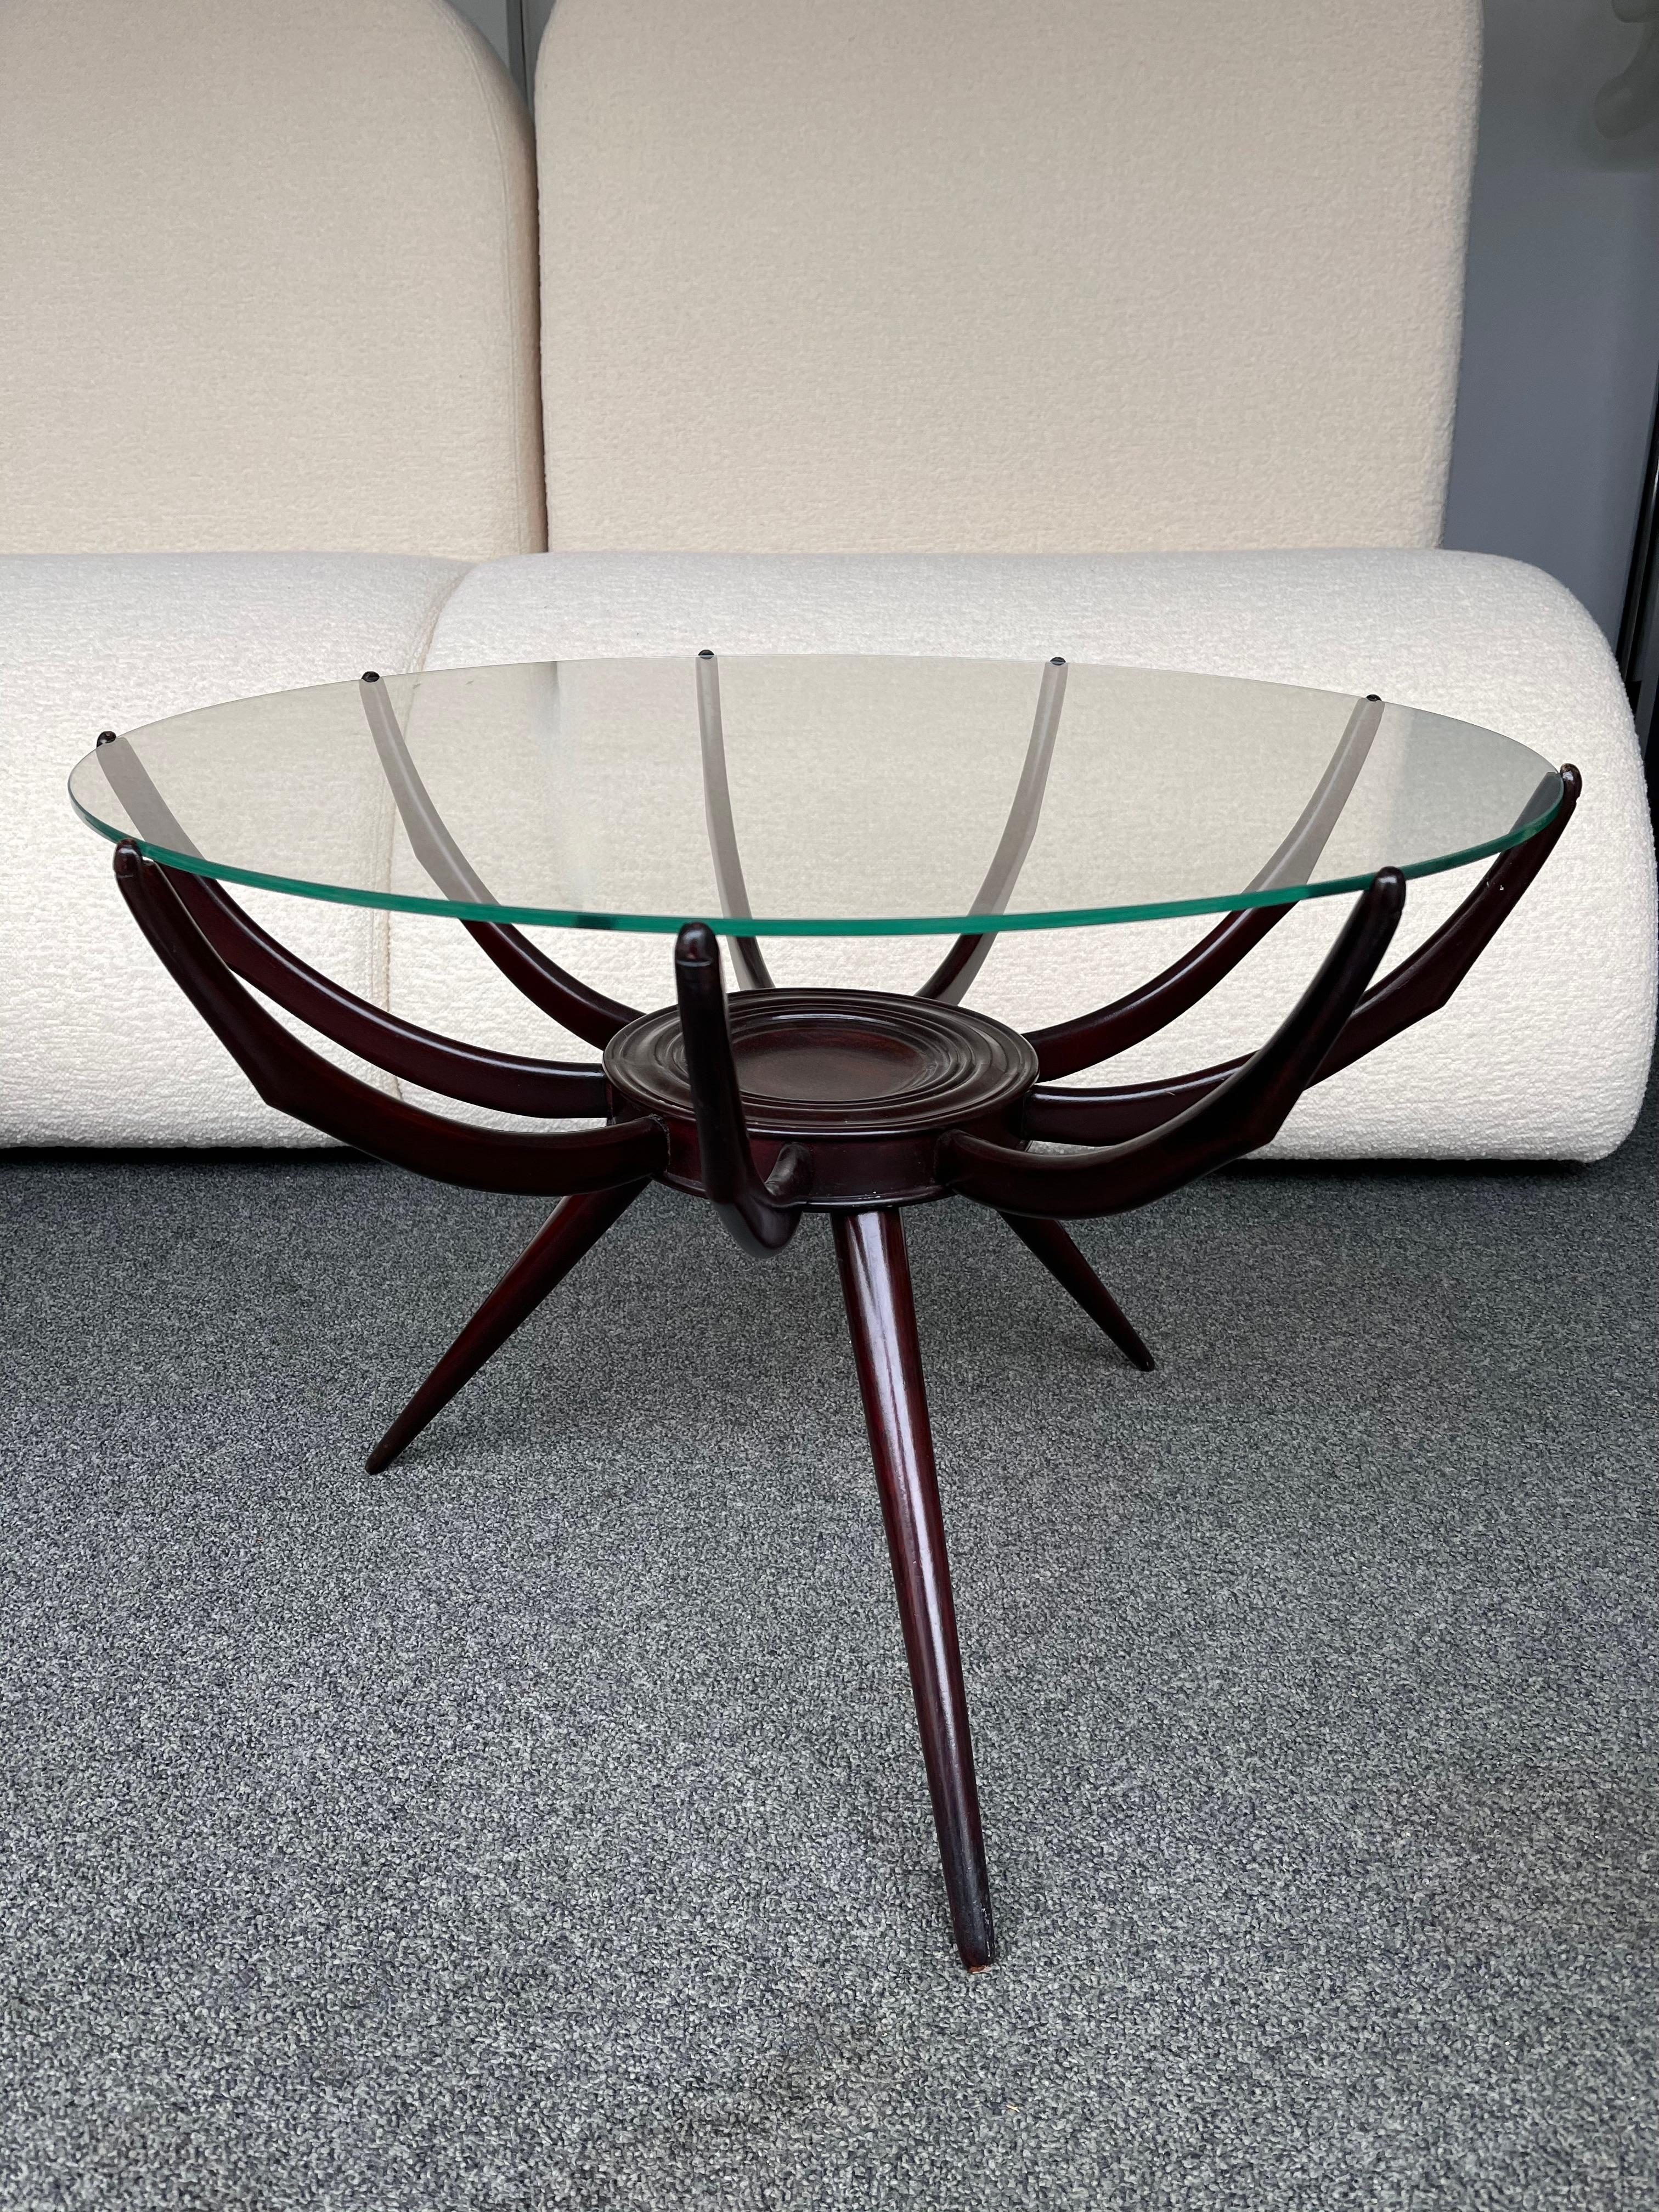 Mid Century Wood and Glass Spider Coffee Table by Carlo De Carli, Italy, 1950s For Sale 1